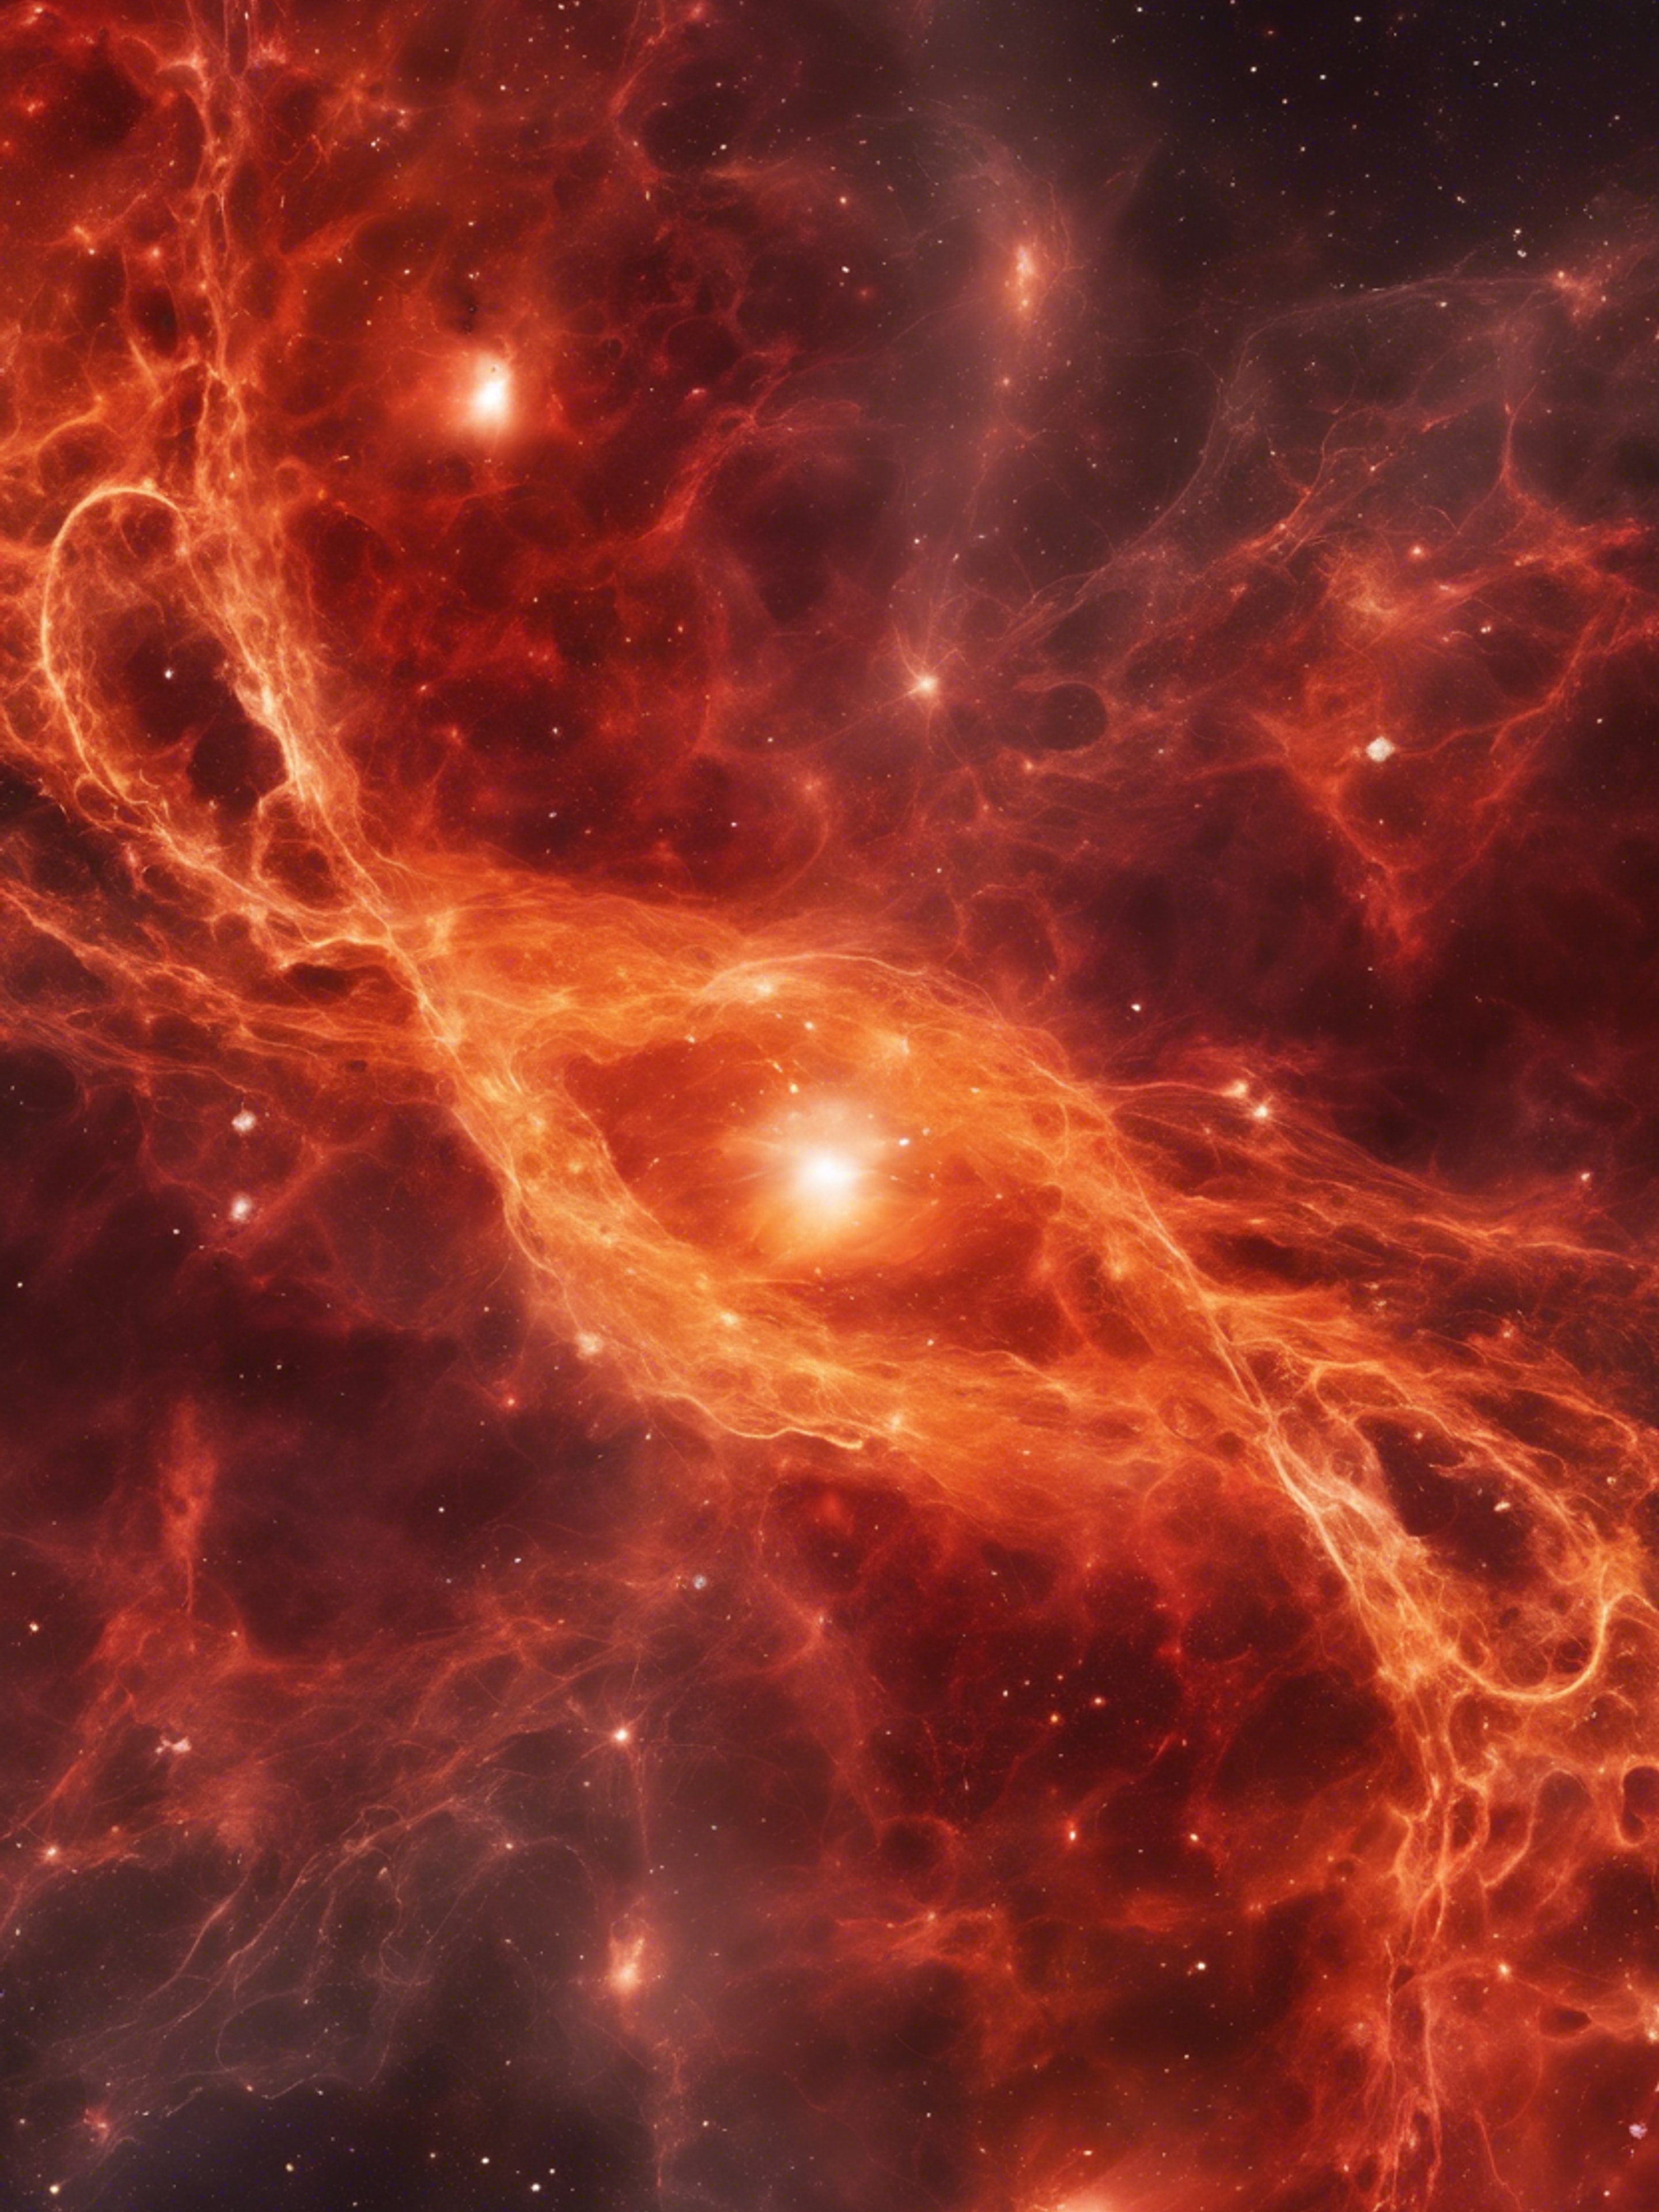 Red and orange nebula moving in chaos to form an alluring abstract pattern, lost in an endless loop. Fond d'écran[8b81d5815a2d445c9bb4]